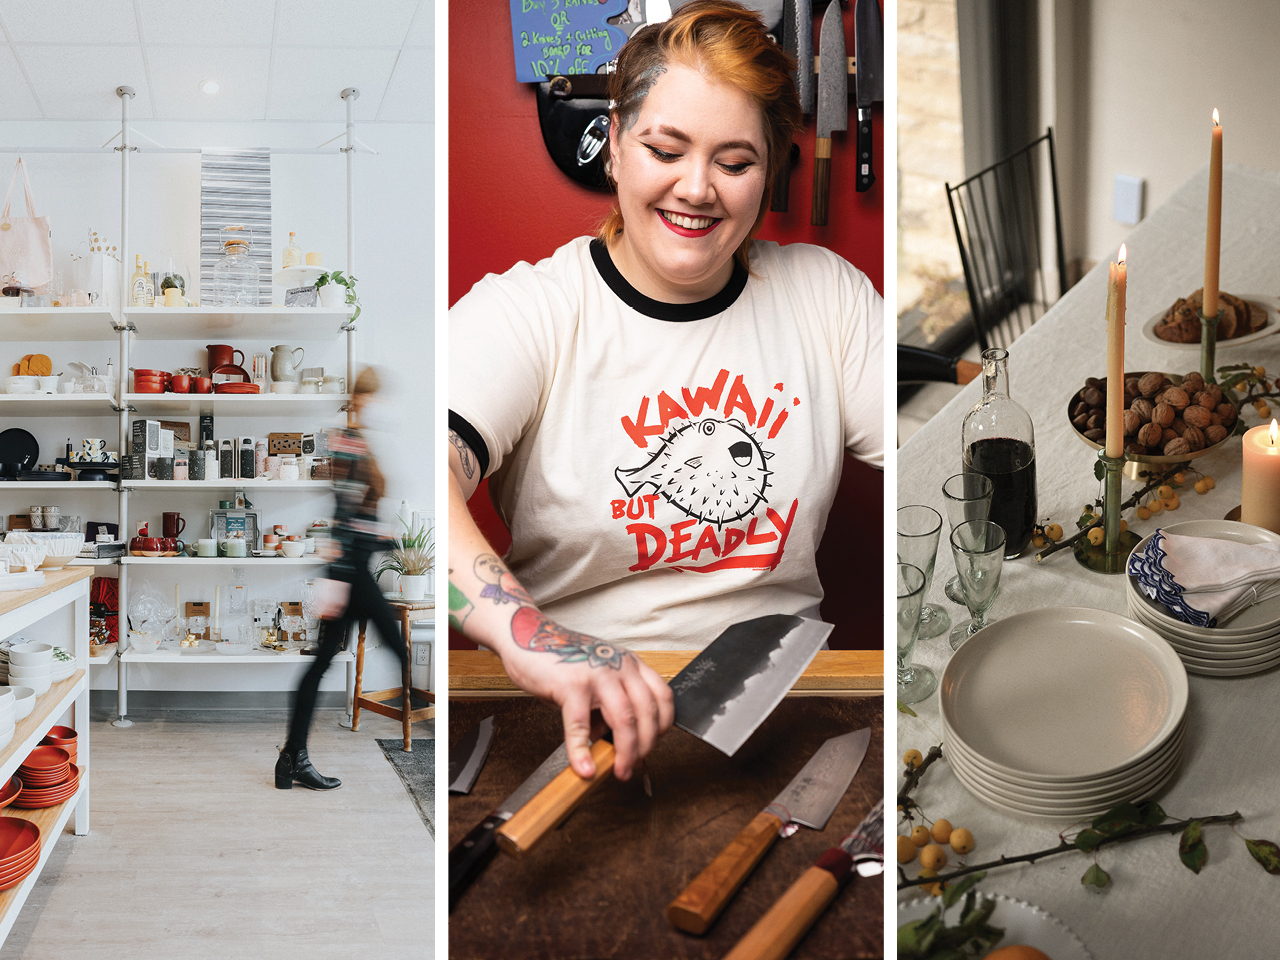 A photo collage showing interiors of various kitchen stores plus a woman who works at a knife store holding a knife.